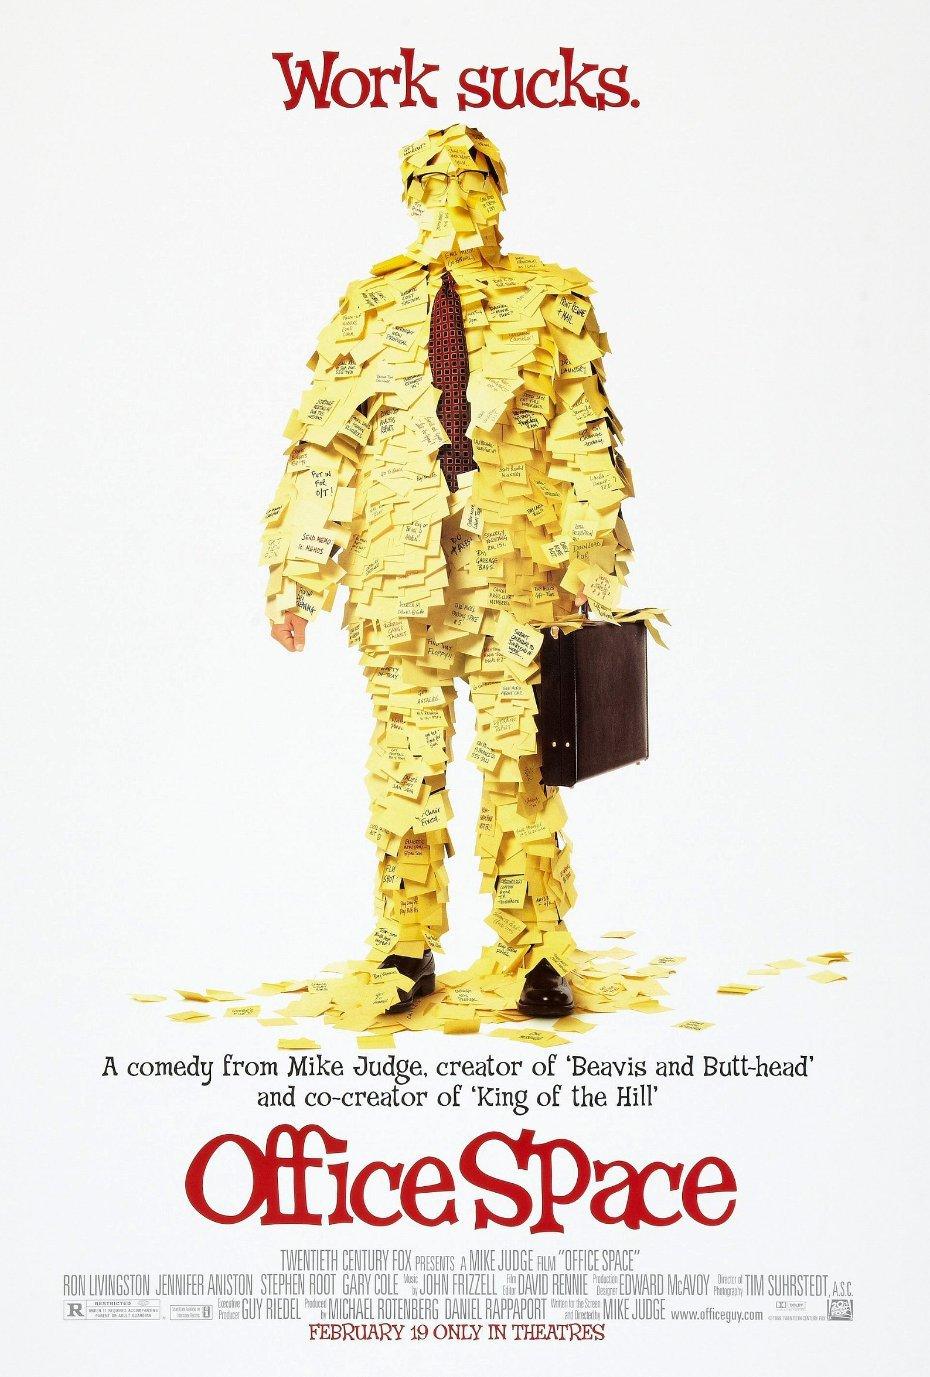 5. Office Space (1999):